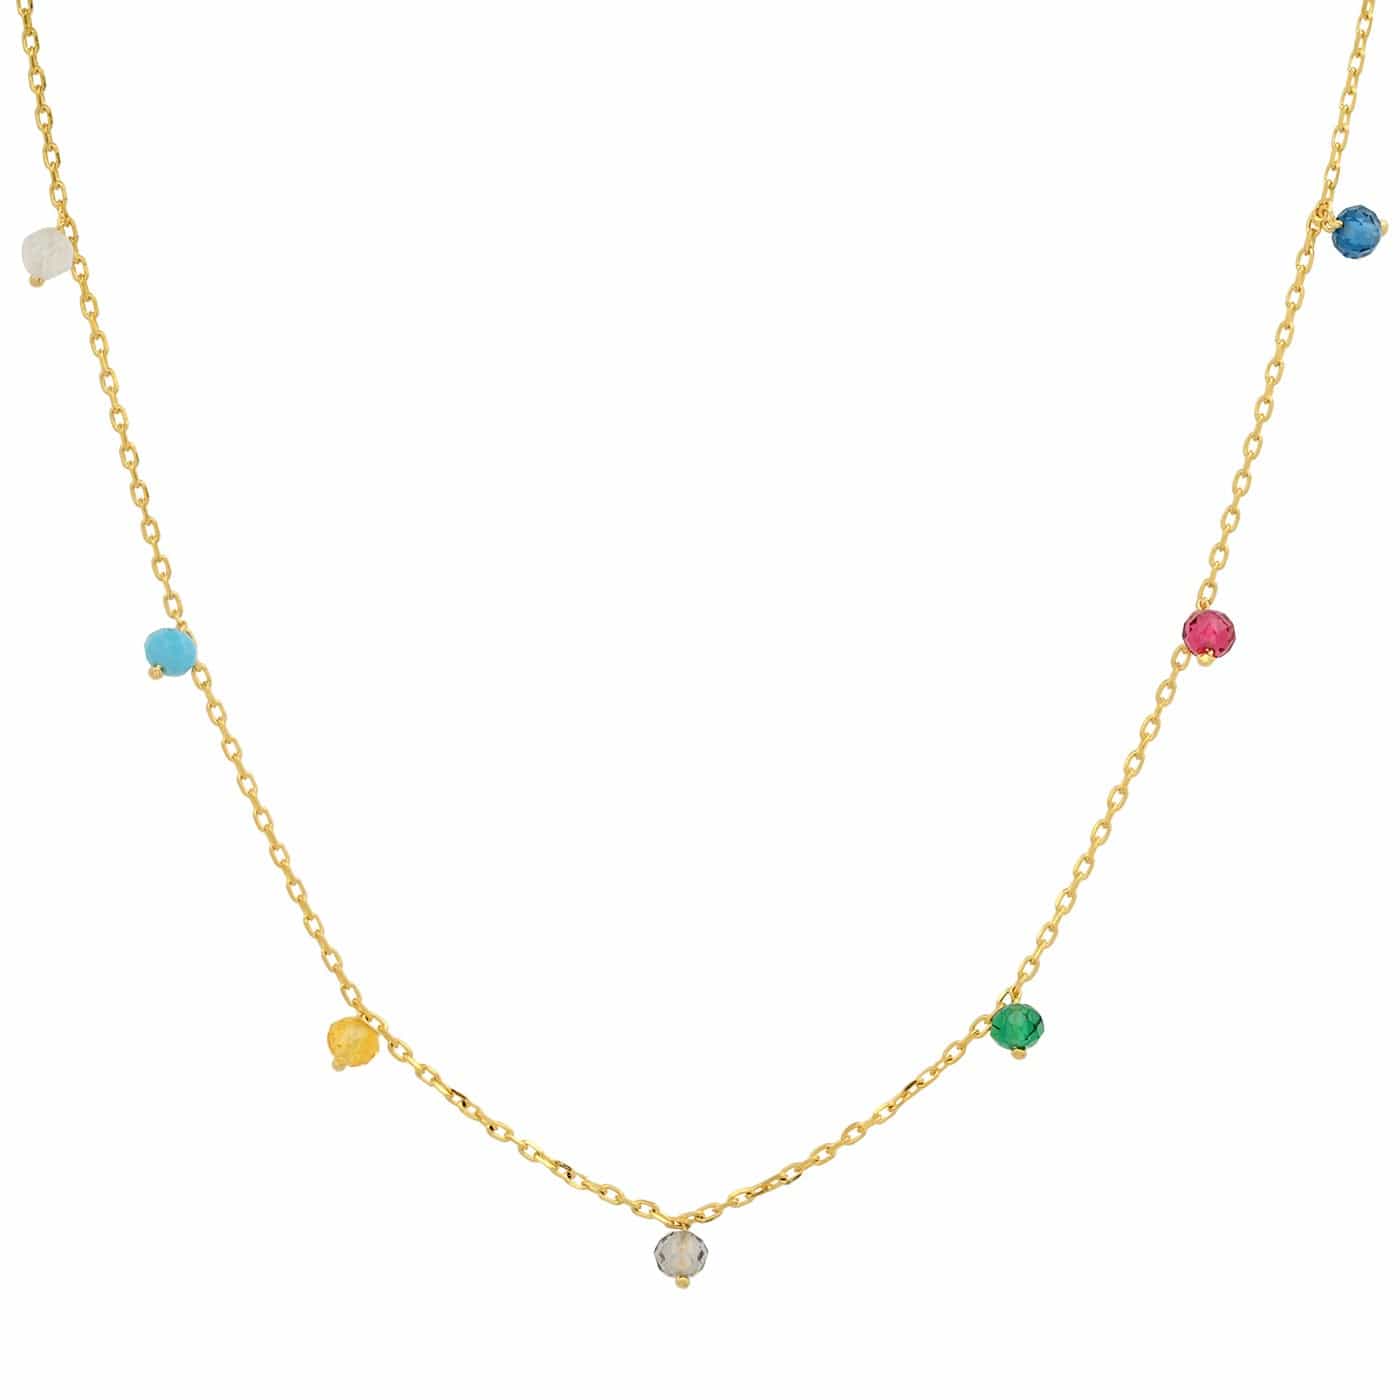 TAI JEWELRY Necklace Multi-Colored CZ Station Necklace